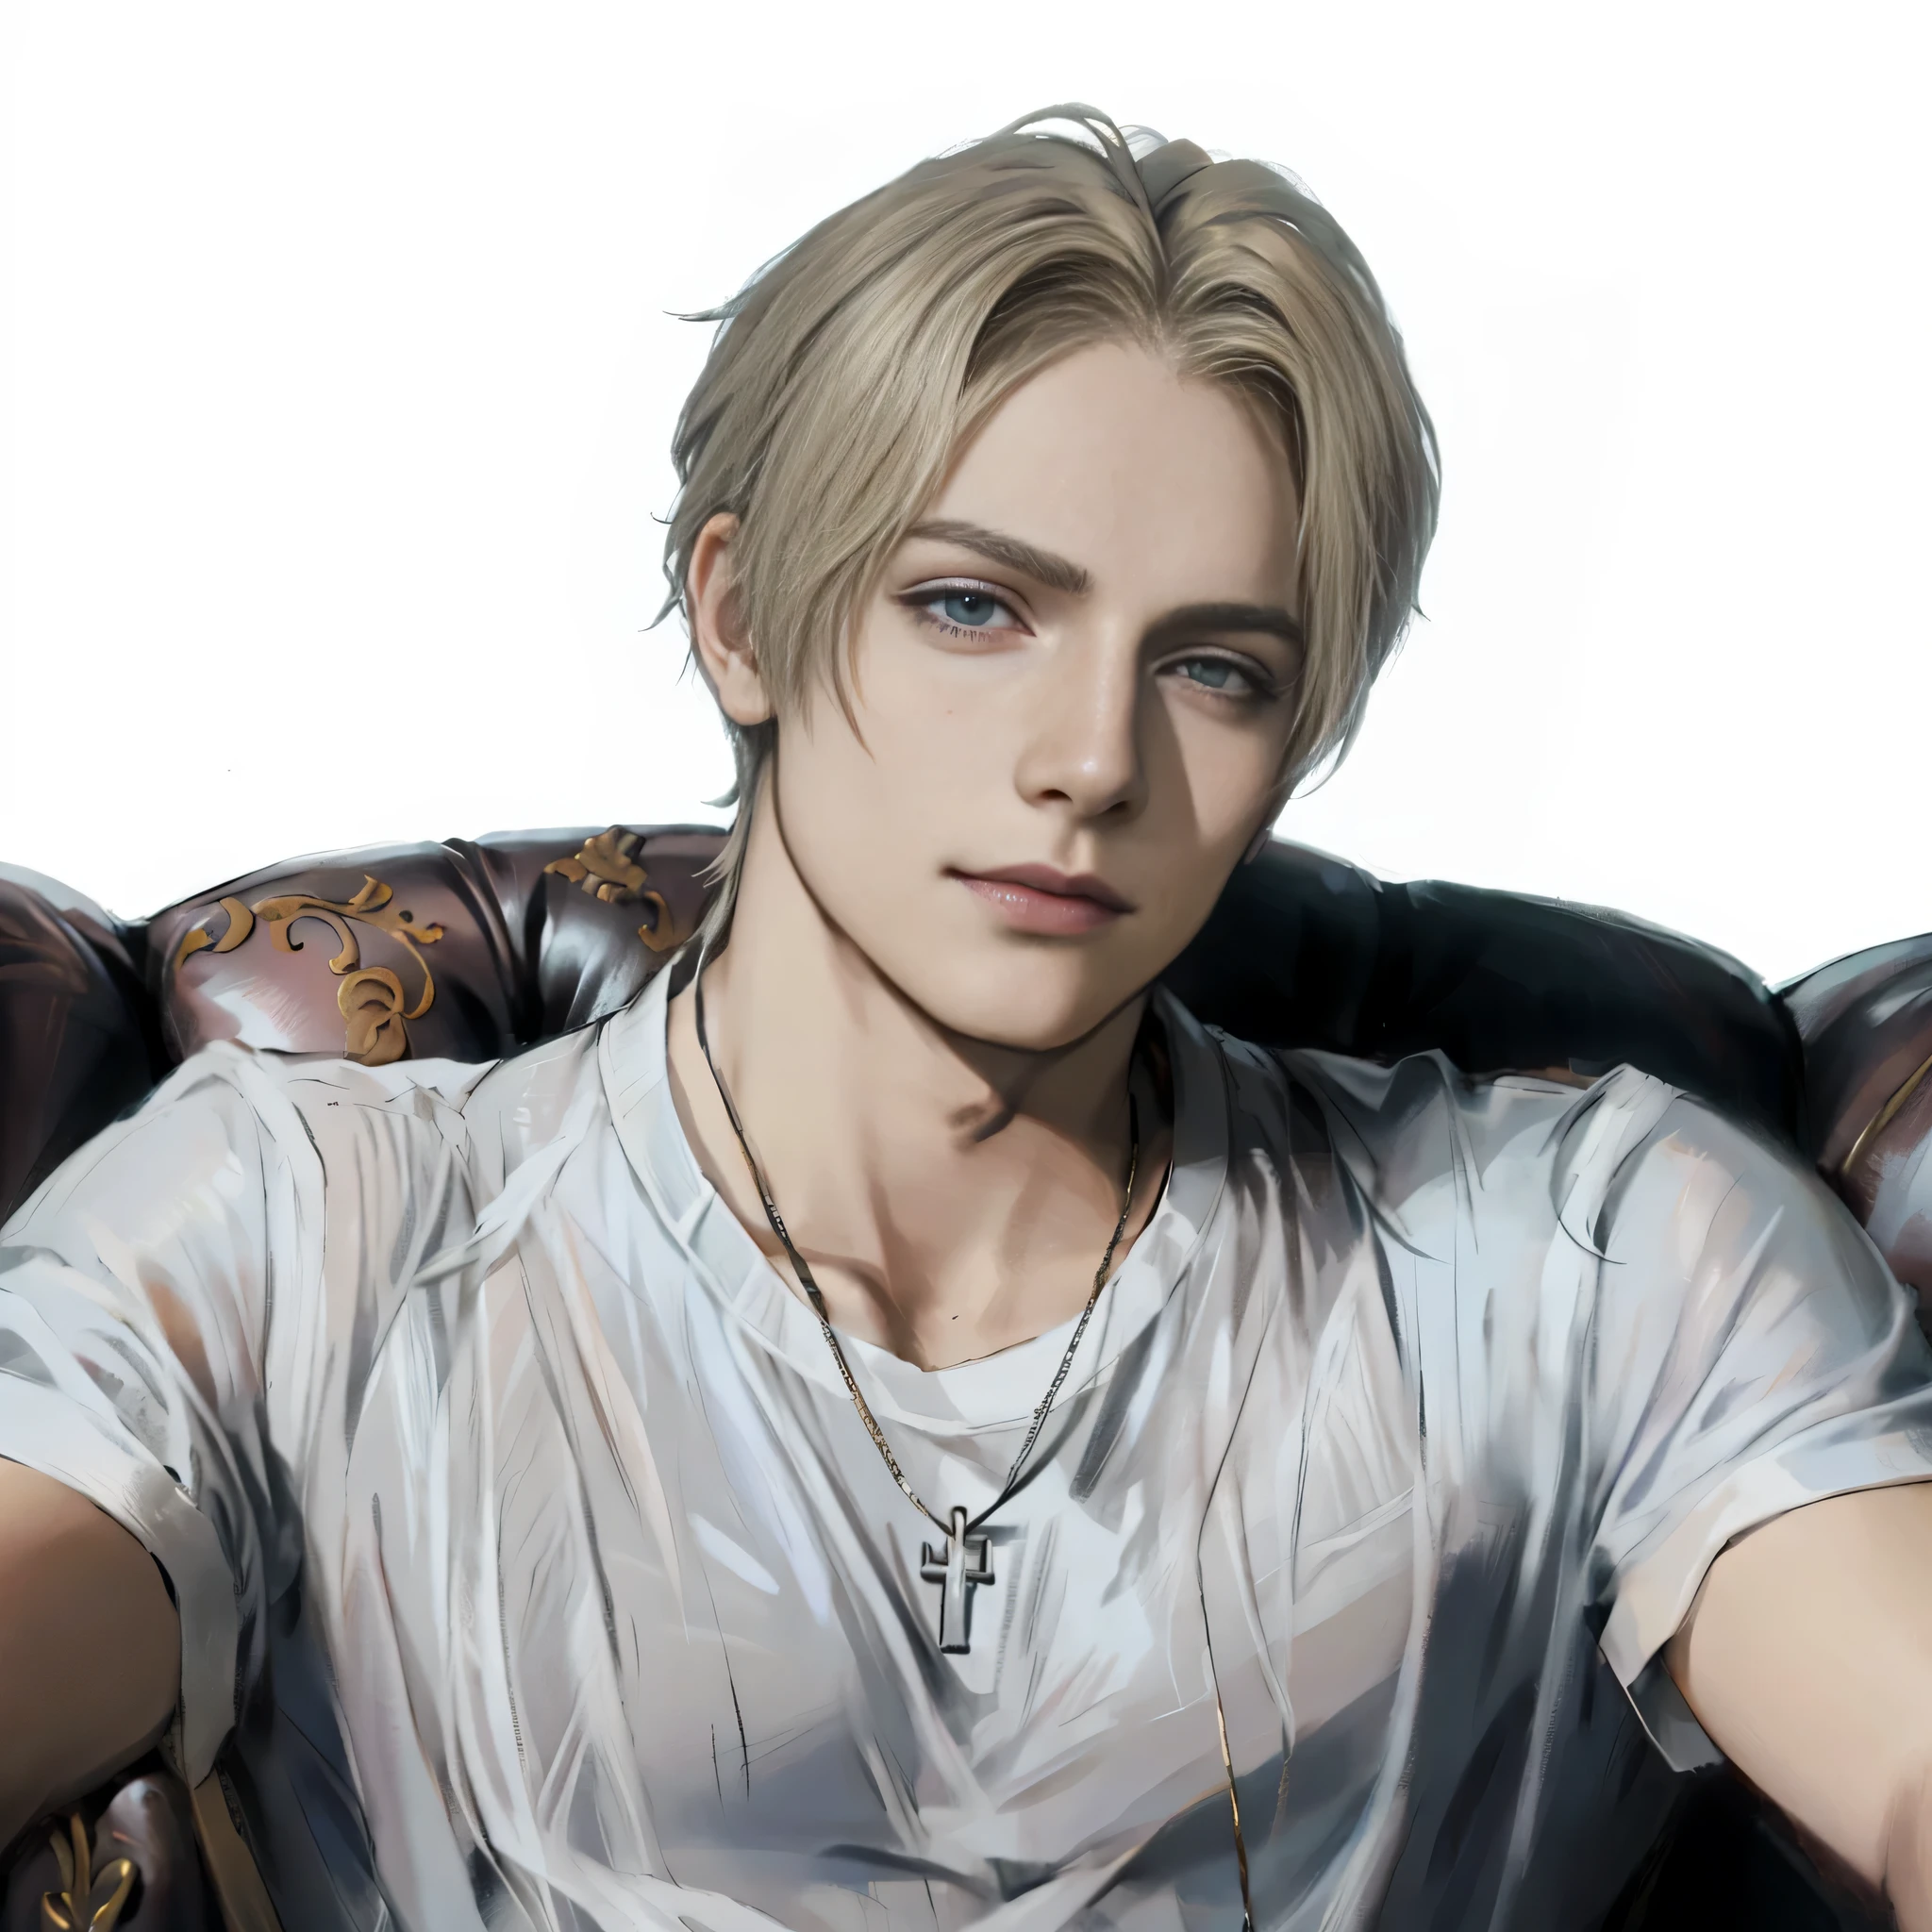 There's a man sitting on a couch with a remote control, Juan Liebert mixed with alucard, Juan Liebert mixed with dante, Juan Liebert, delicate androgynous prince, beautiful androgynous prince, xqc, handsome boy in Demon Slayer art, cai xukun, sakimichan frank franzzeta, high quality portrait, male anime character